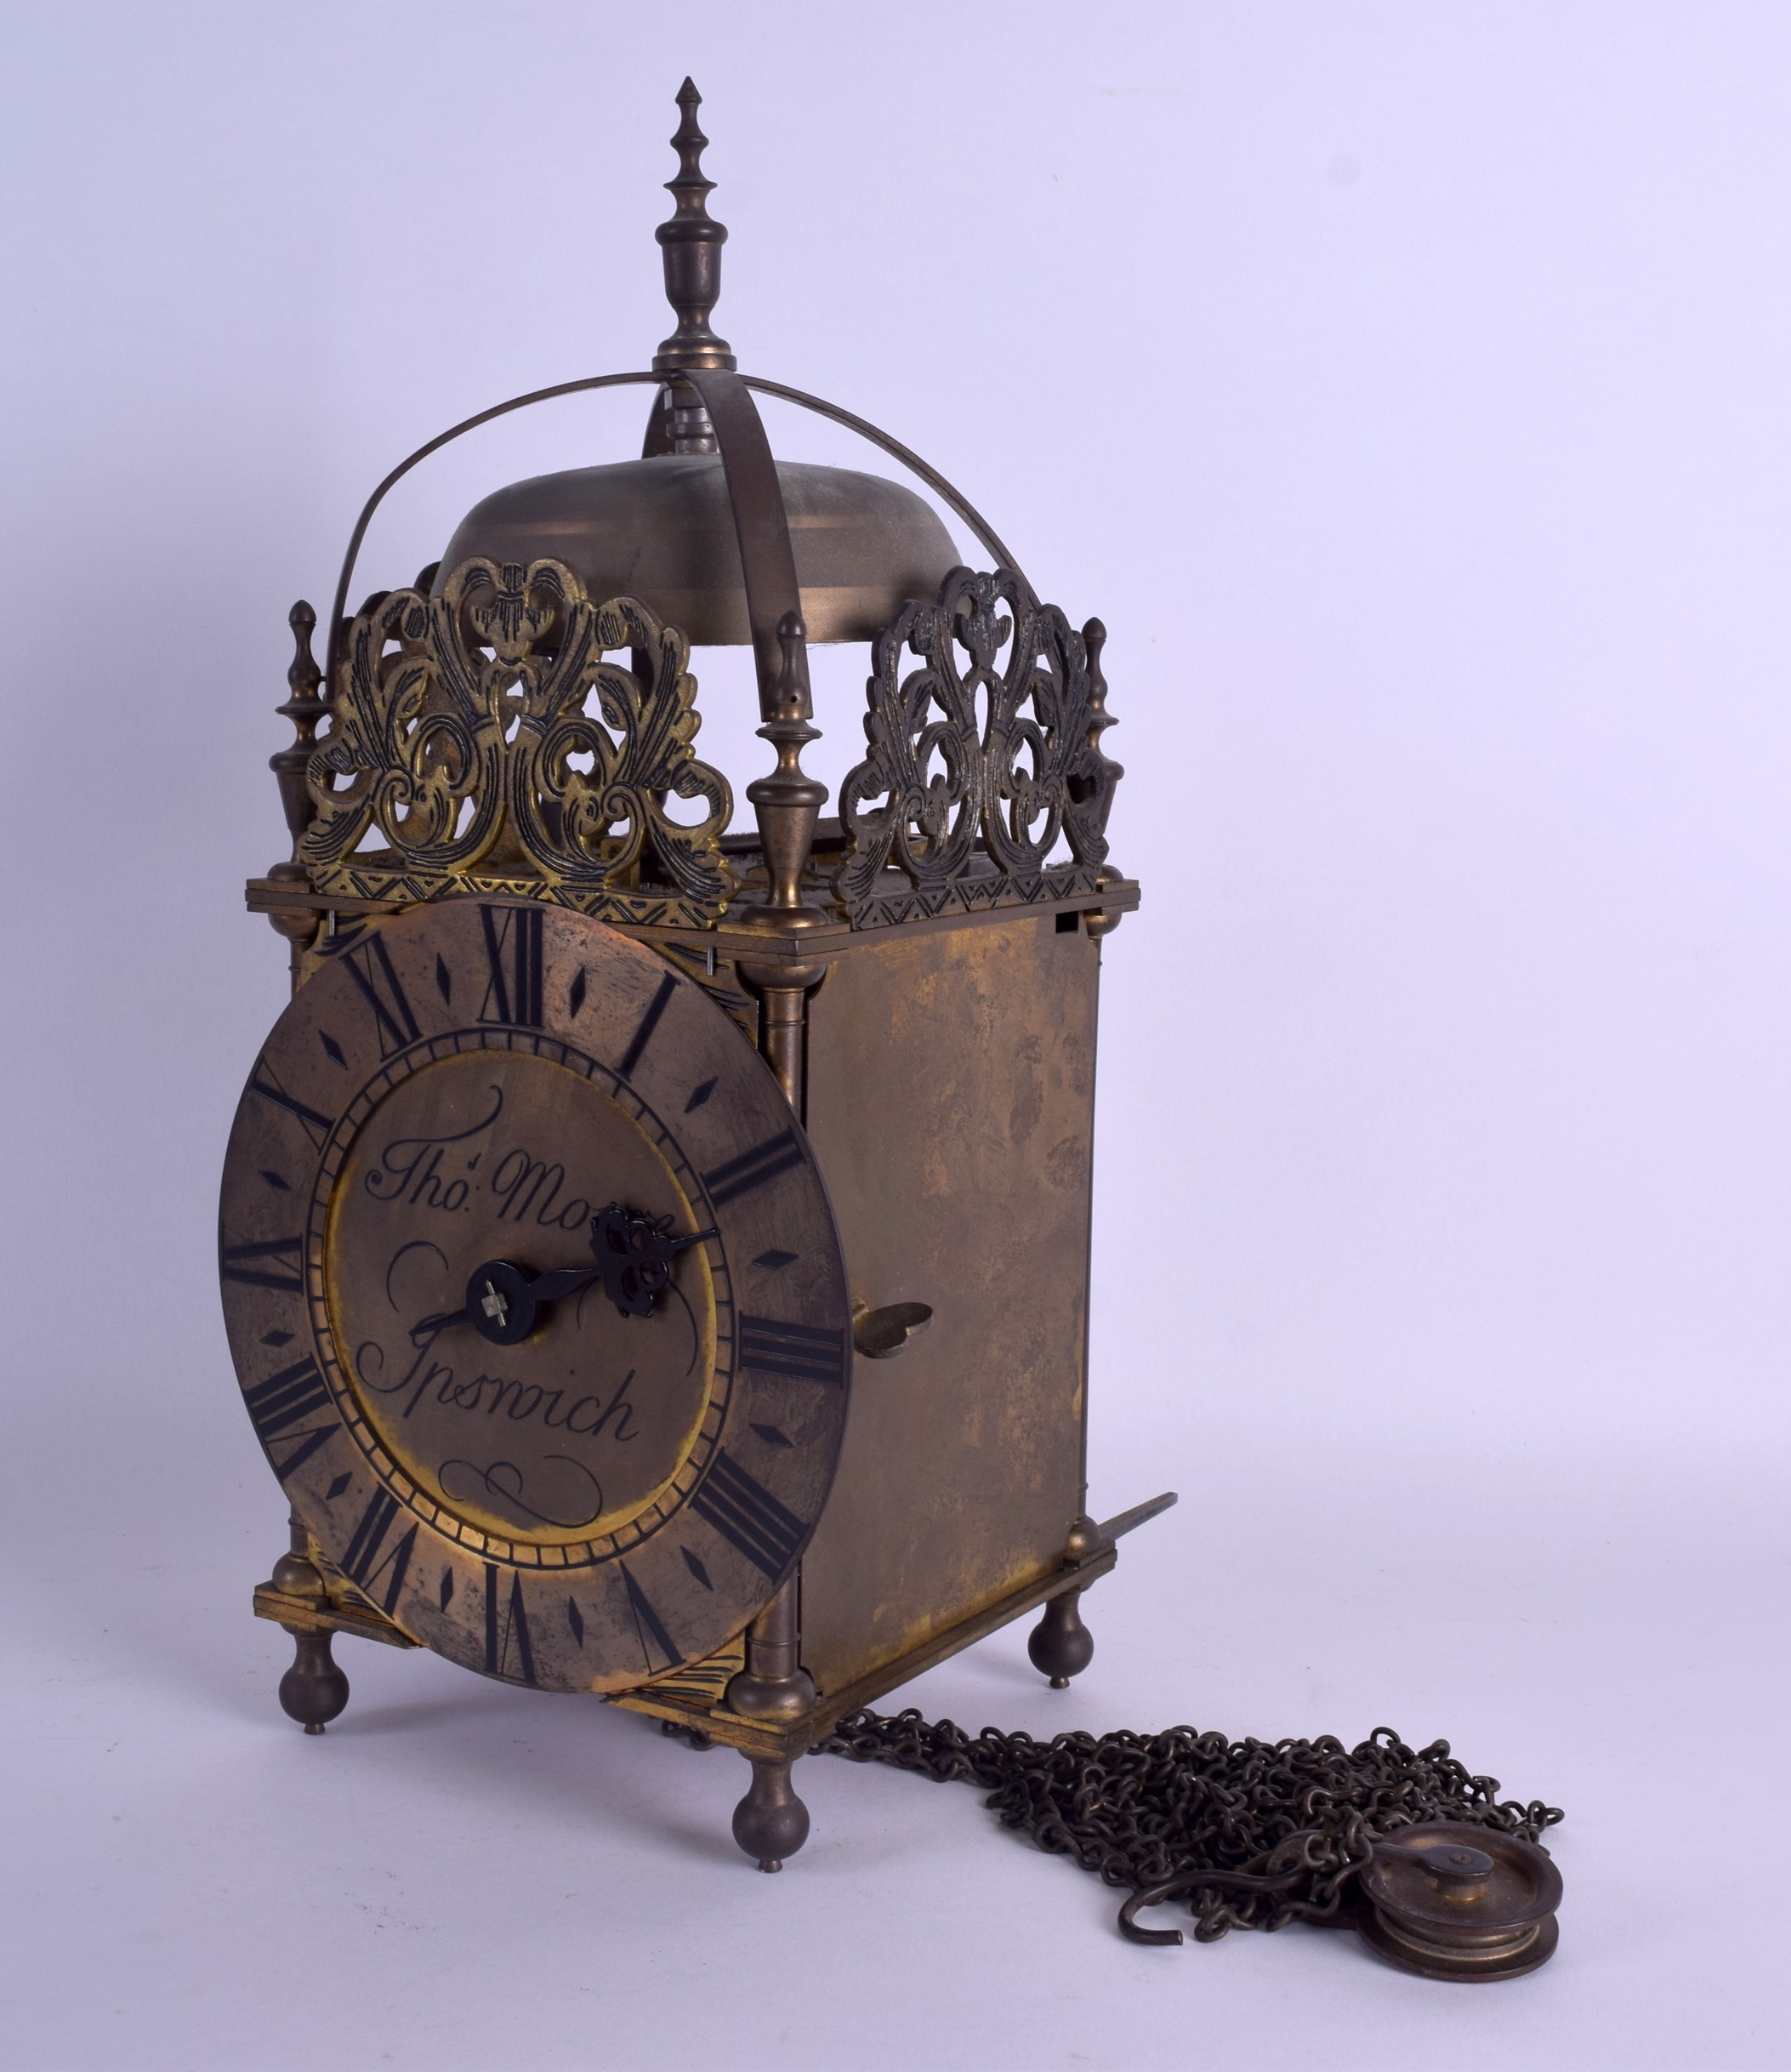 A BRASS LANTERN CLOCK by Thomas Moore of Ipswich, decorated with open work foliage. 37 cm x 15 cm.